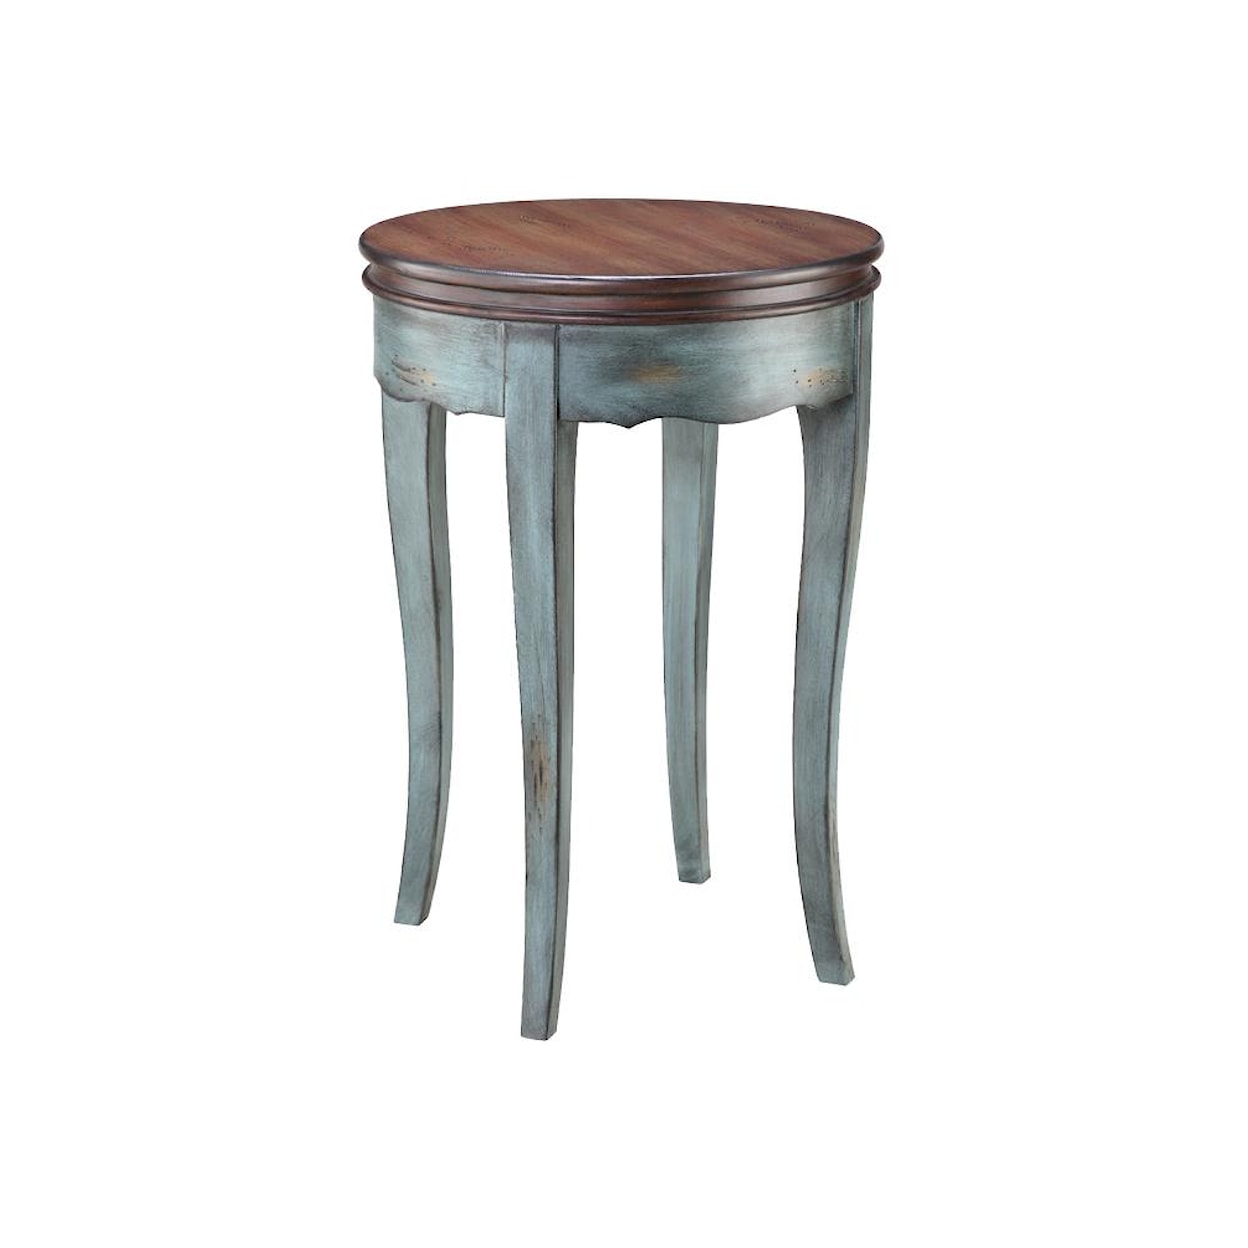 Stein World Accent Tables Hartford Accent Table